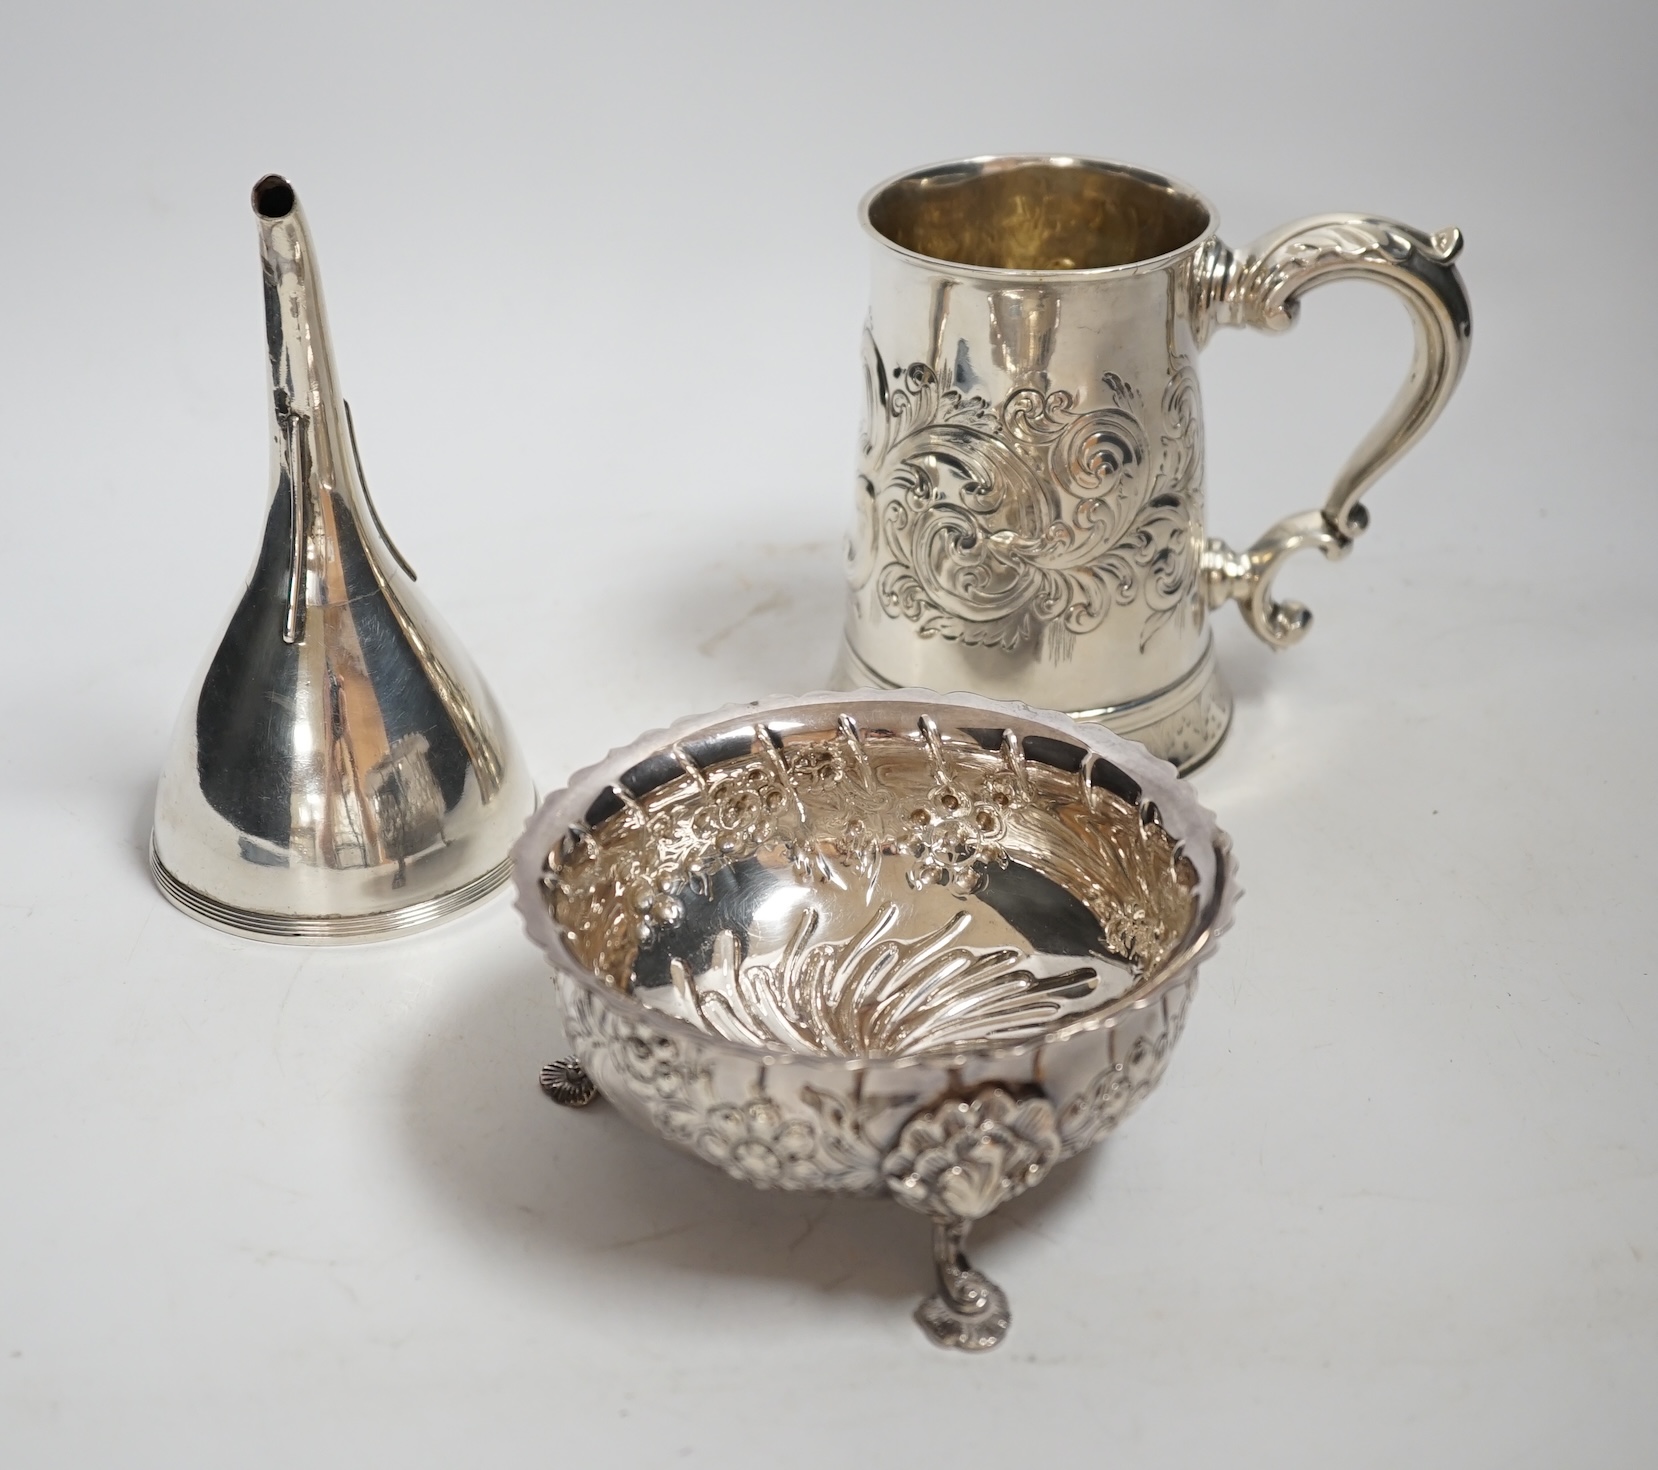 A George III silver mug, with later embossed decoration, London, 1783,11.6cm, together with a George III silver wine funnel and a modern Irish silver sugar bowl, 21.5oz.